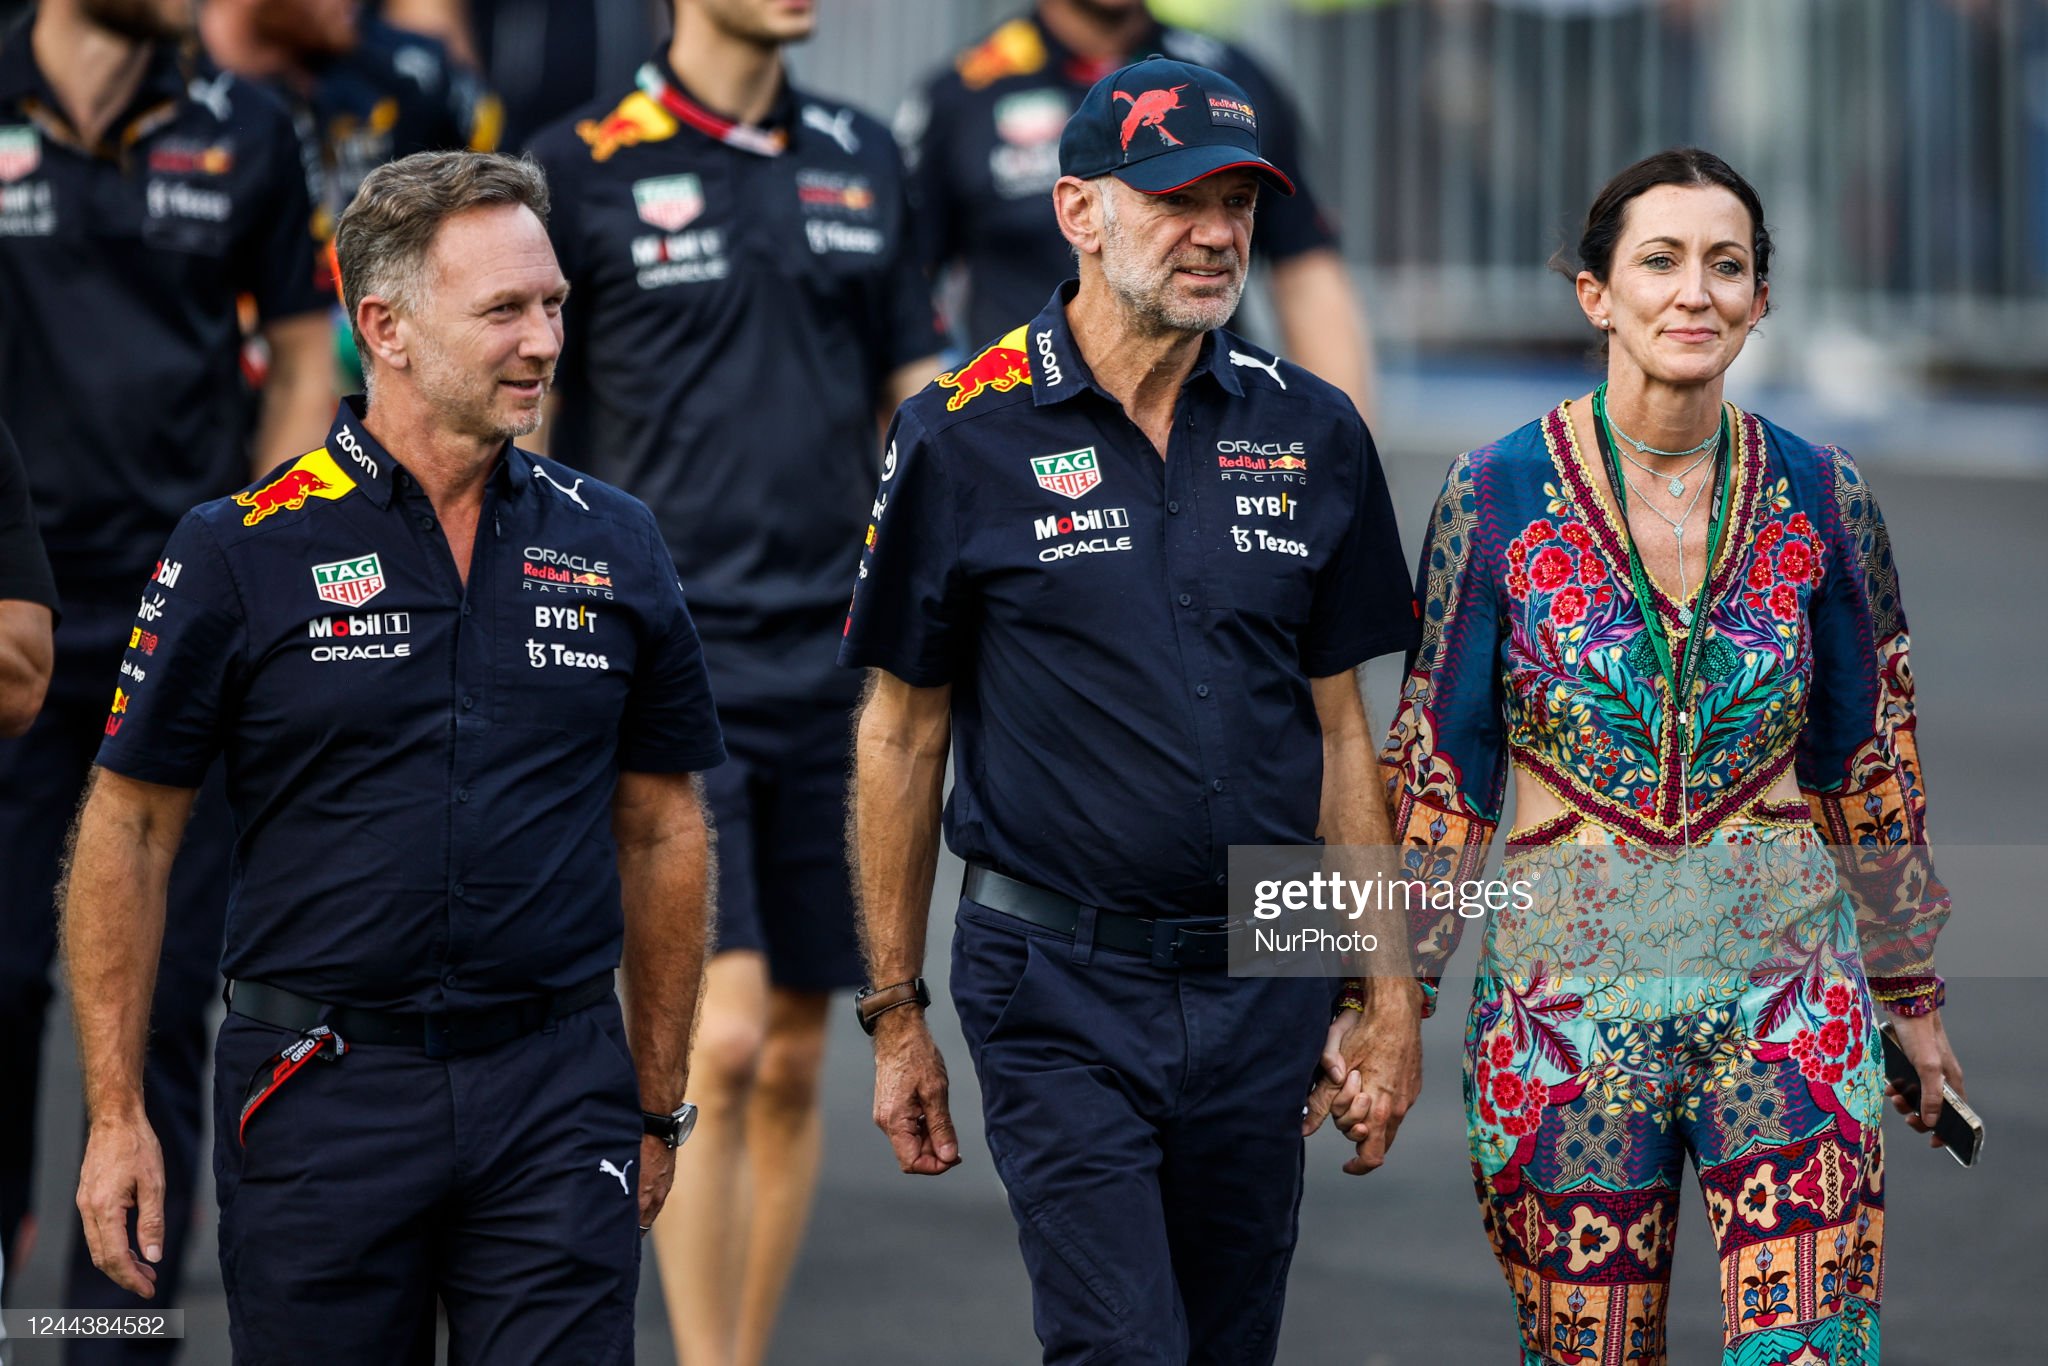 Adrian Newey (Chief Technical Officer of Red Bull Racing) with his wife Mandy Smerczak and Christian Horner.